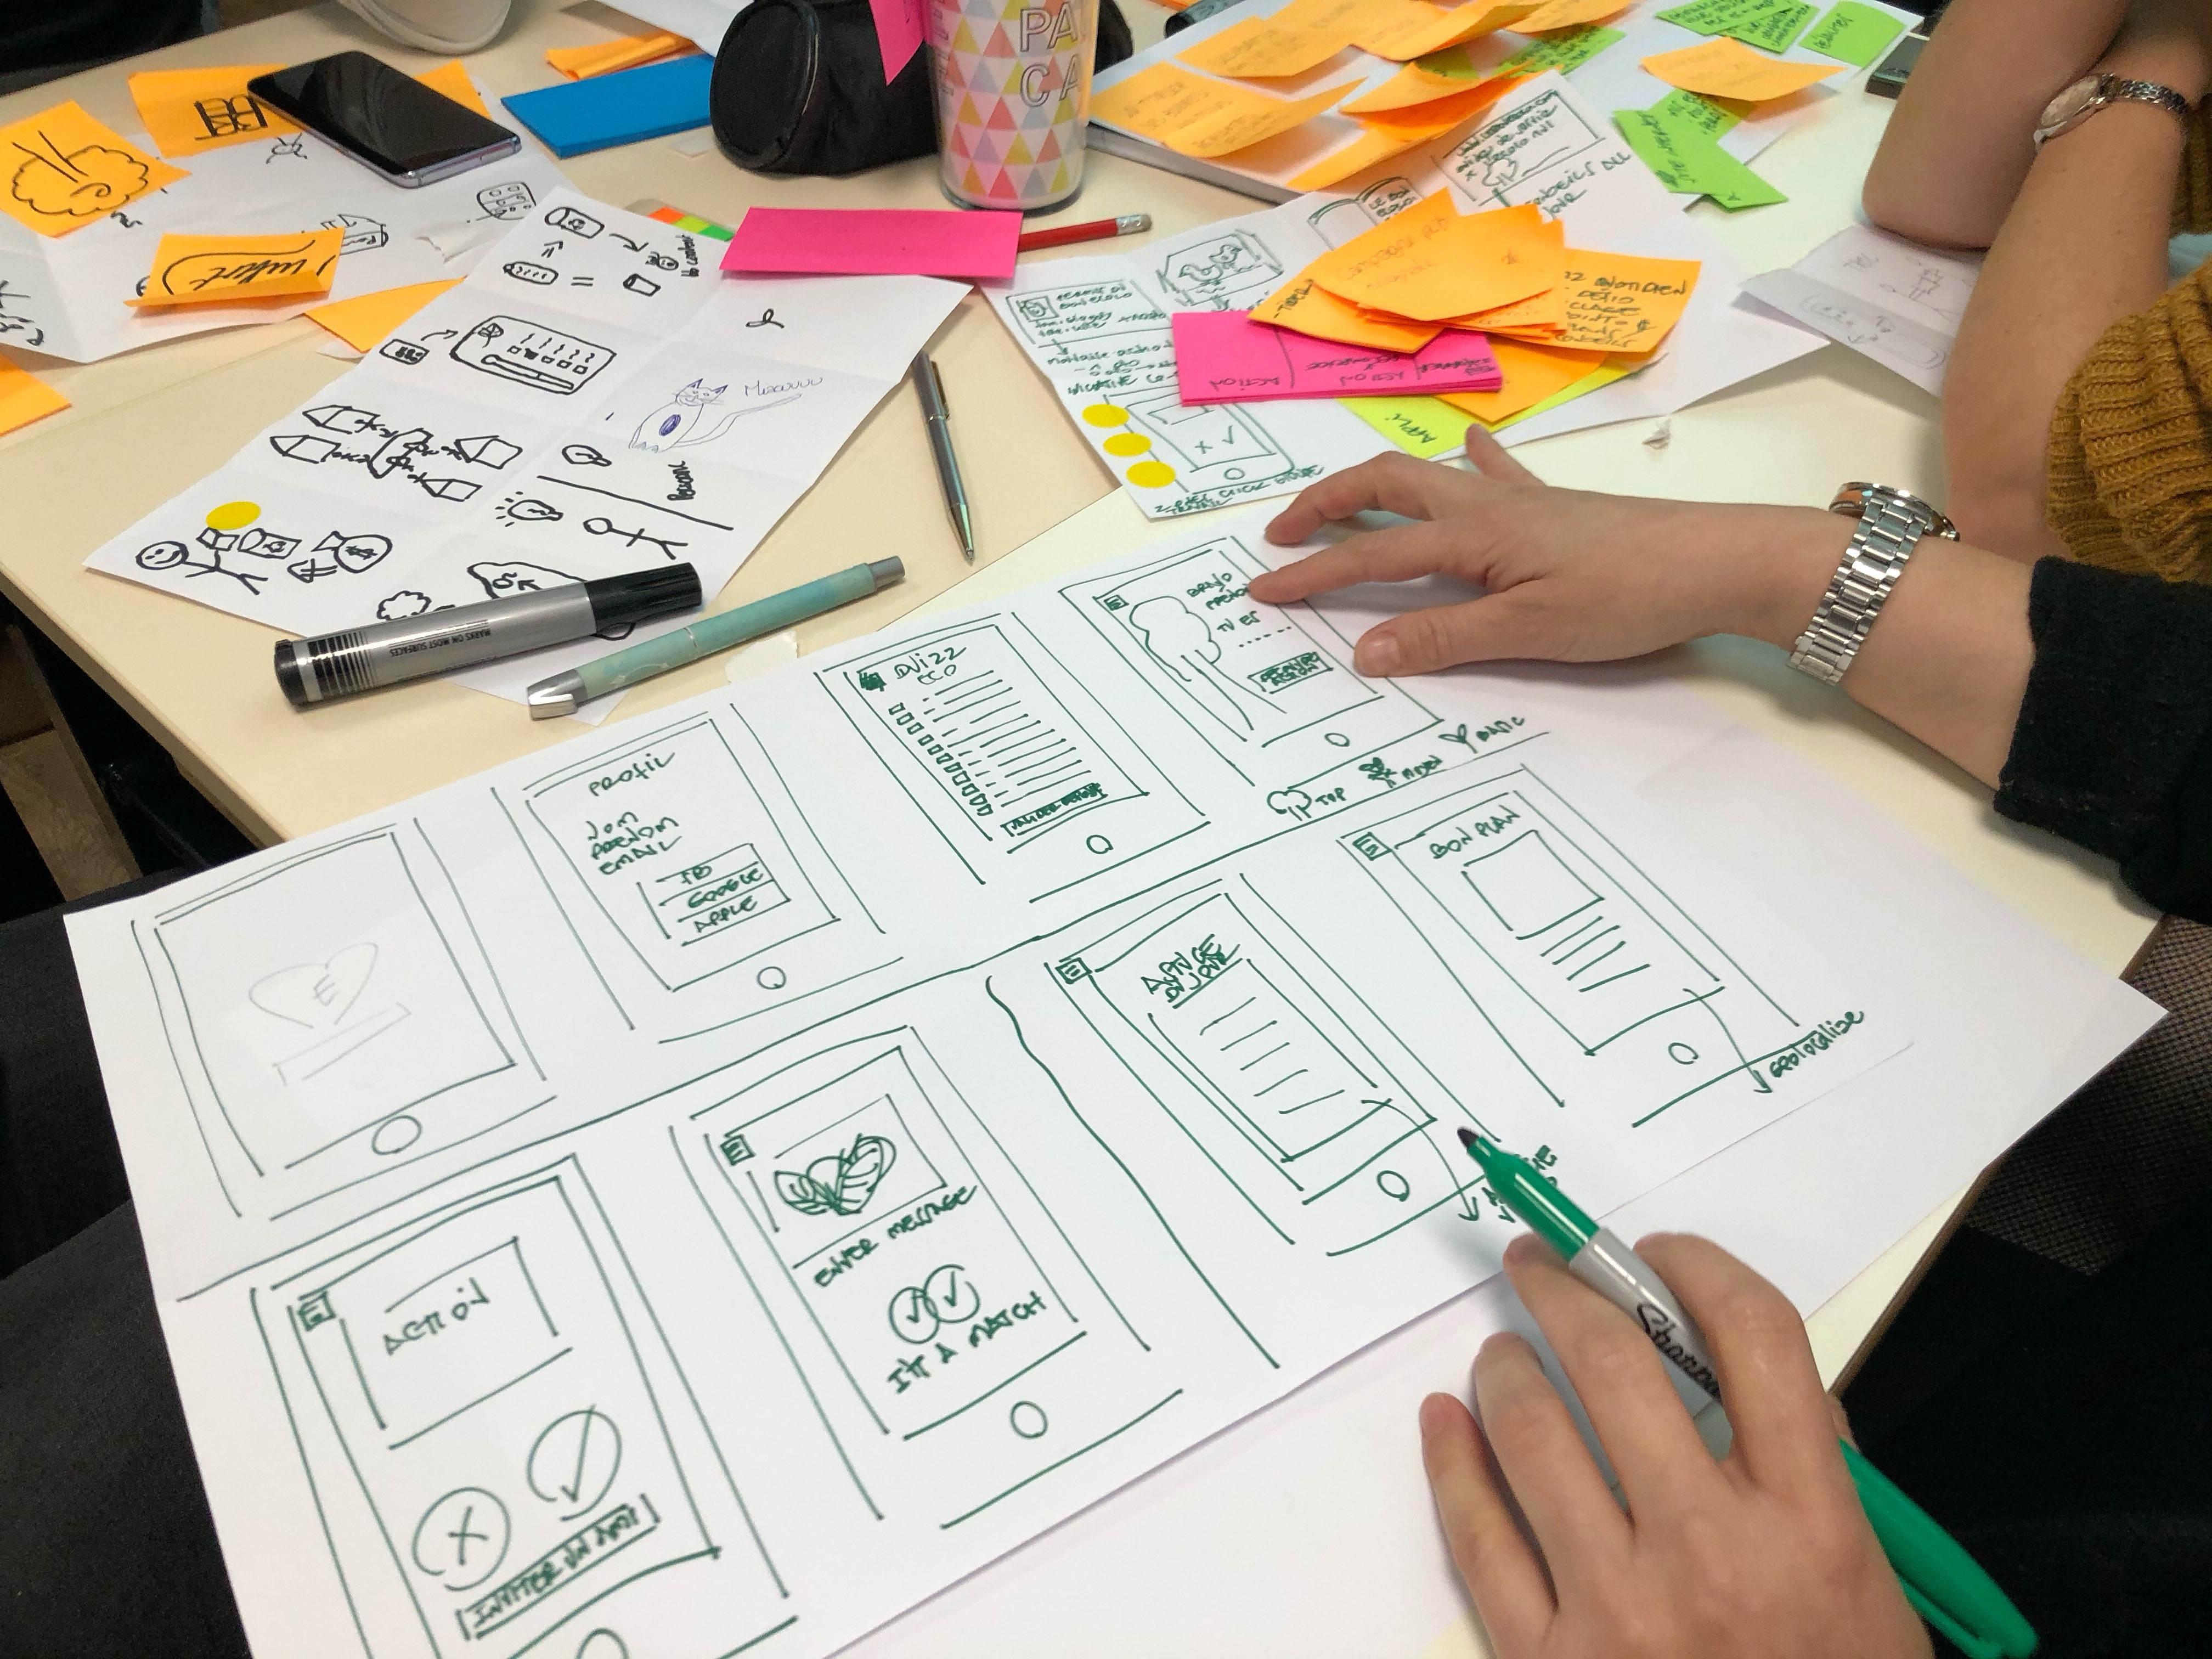 A design session using low-tech materials like papers and sticky notes.